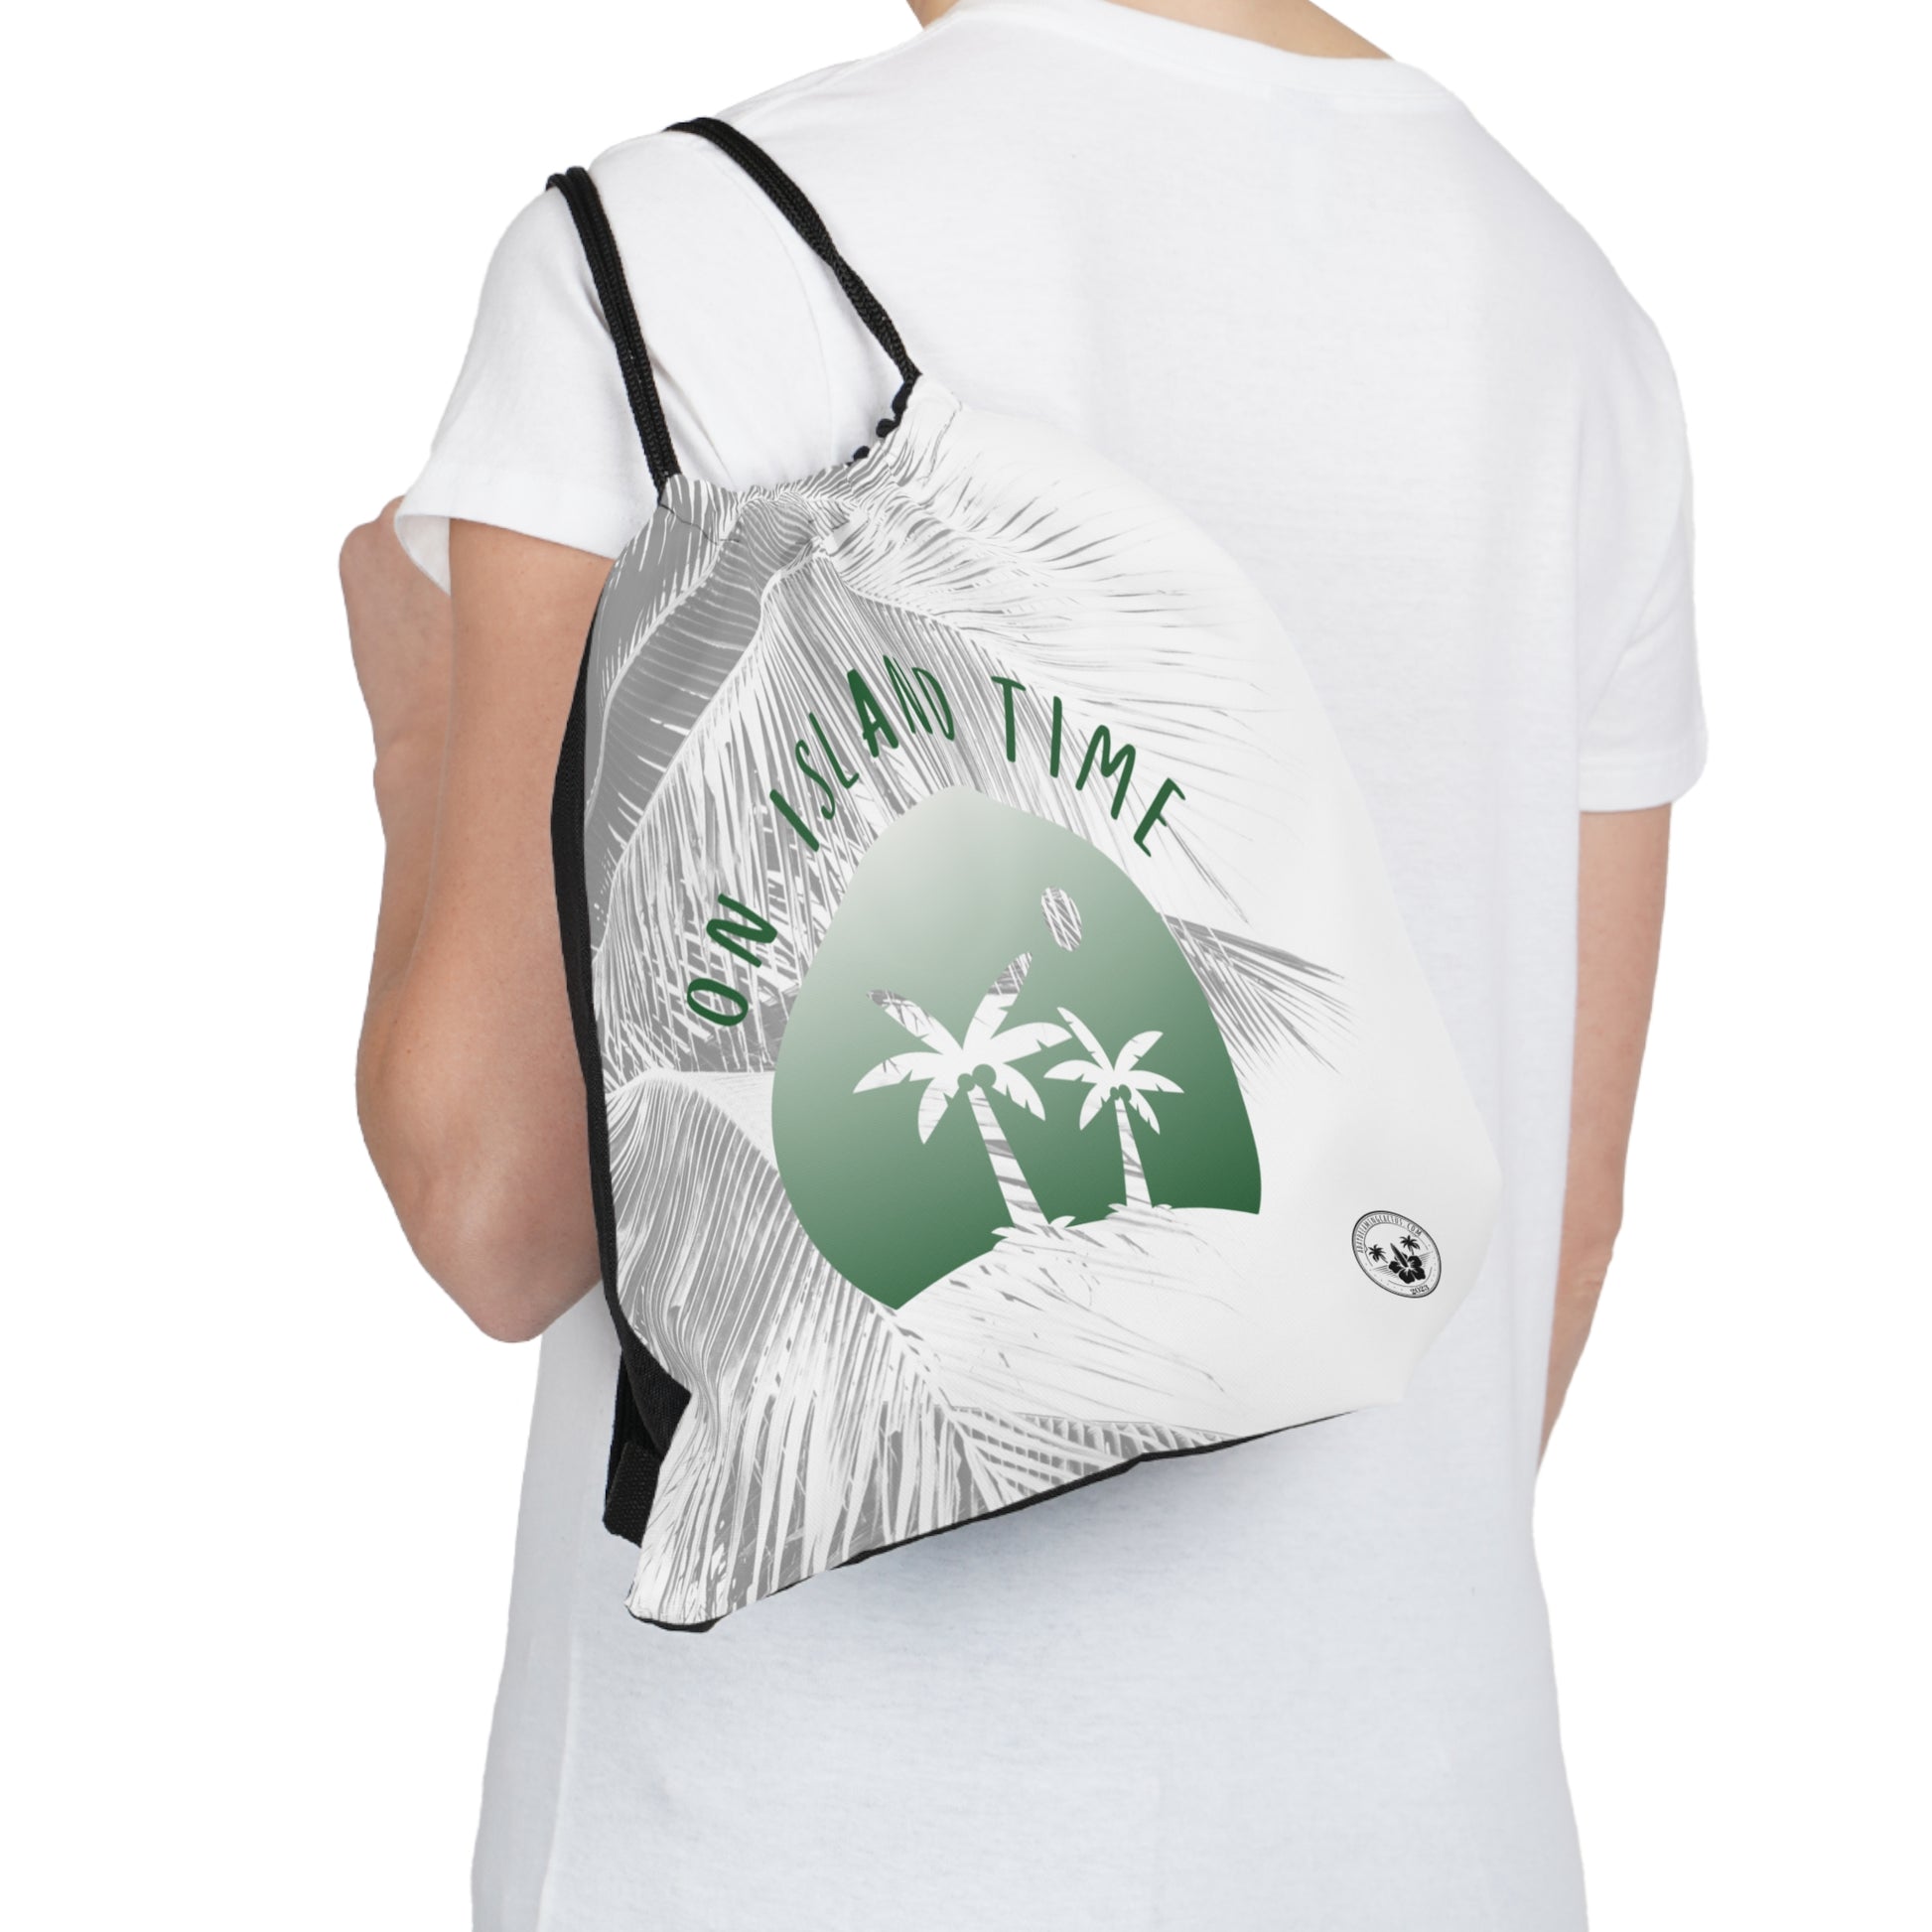 A Daydreaming Cactus created the ultimate travel companion drawstring backpack combines functionality with style, featuring a vibrant gradient green simple graphic of two palmtrees on an island  and grey tone palm tree background with the text "On Island Time" design. Perfect for on-the-go adventurers, this lightweight backpack is ideal for storing essentials while exploring. Grab yours now for an unforgettable journey! This image is front view of the backpack over the shoulder of a model..